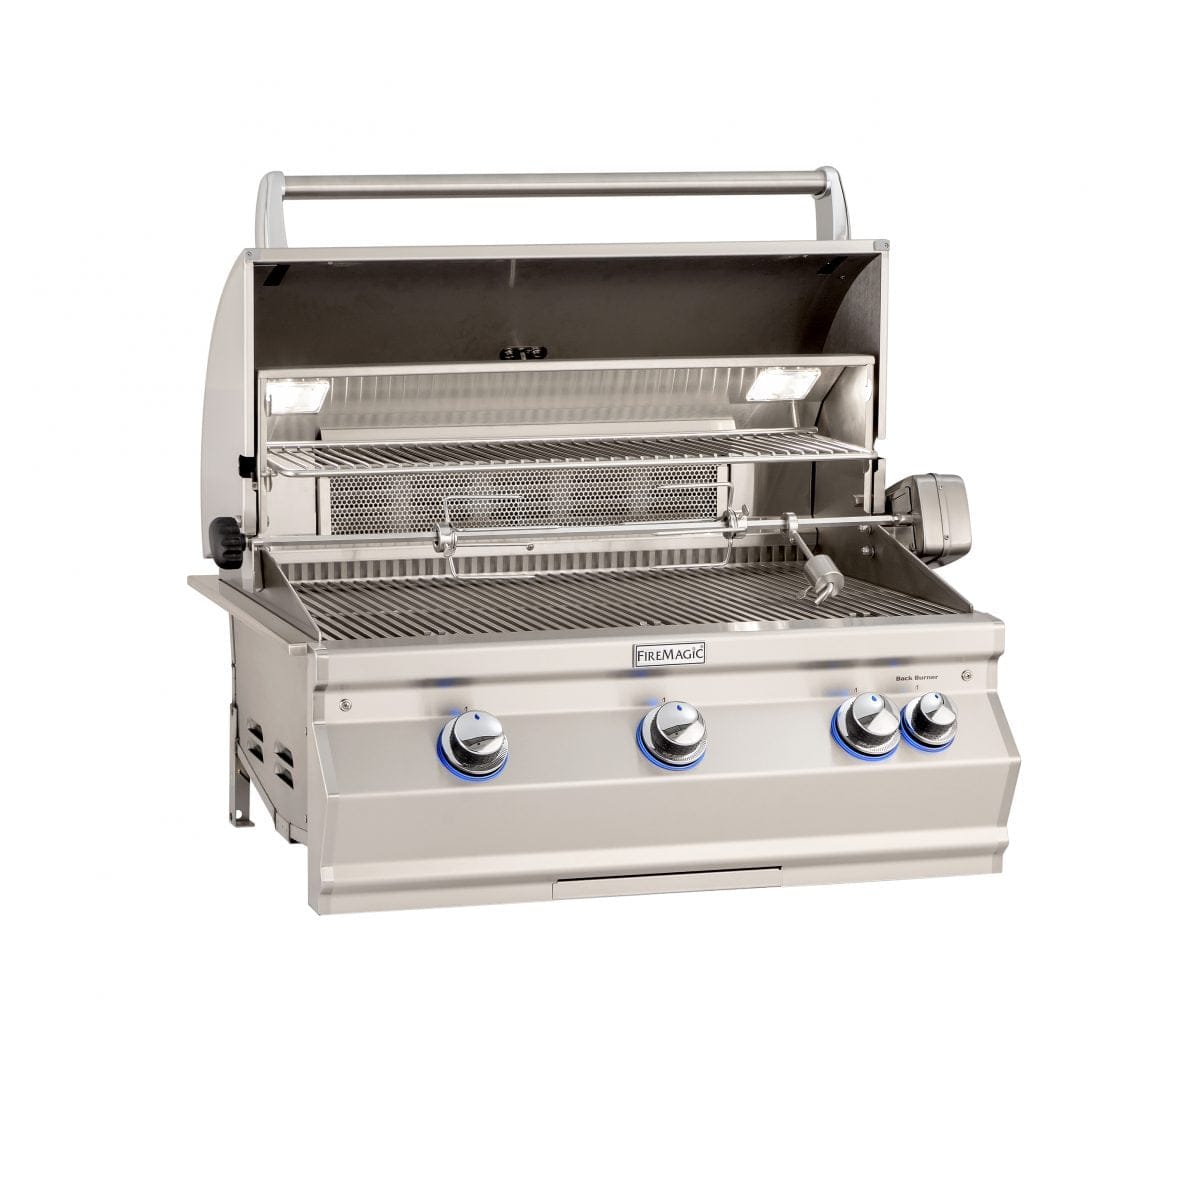 Fire Magic Aurora A540i Built-In Grill - Kitchen King Direct